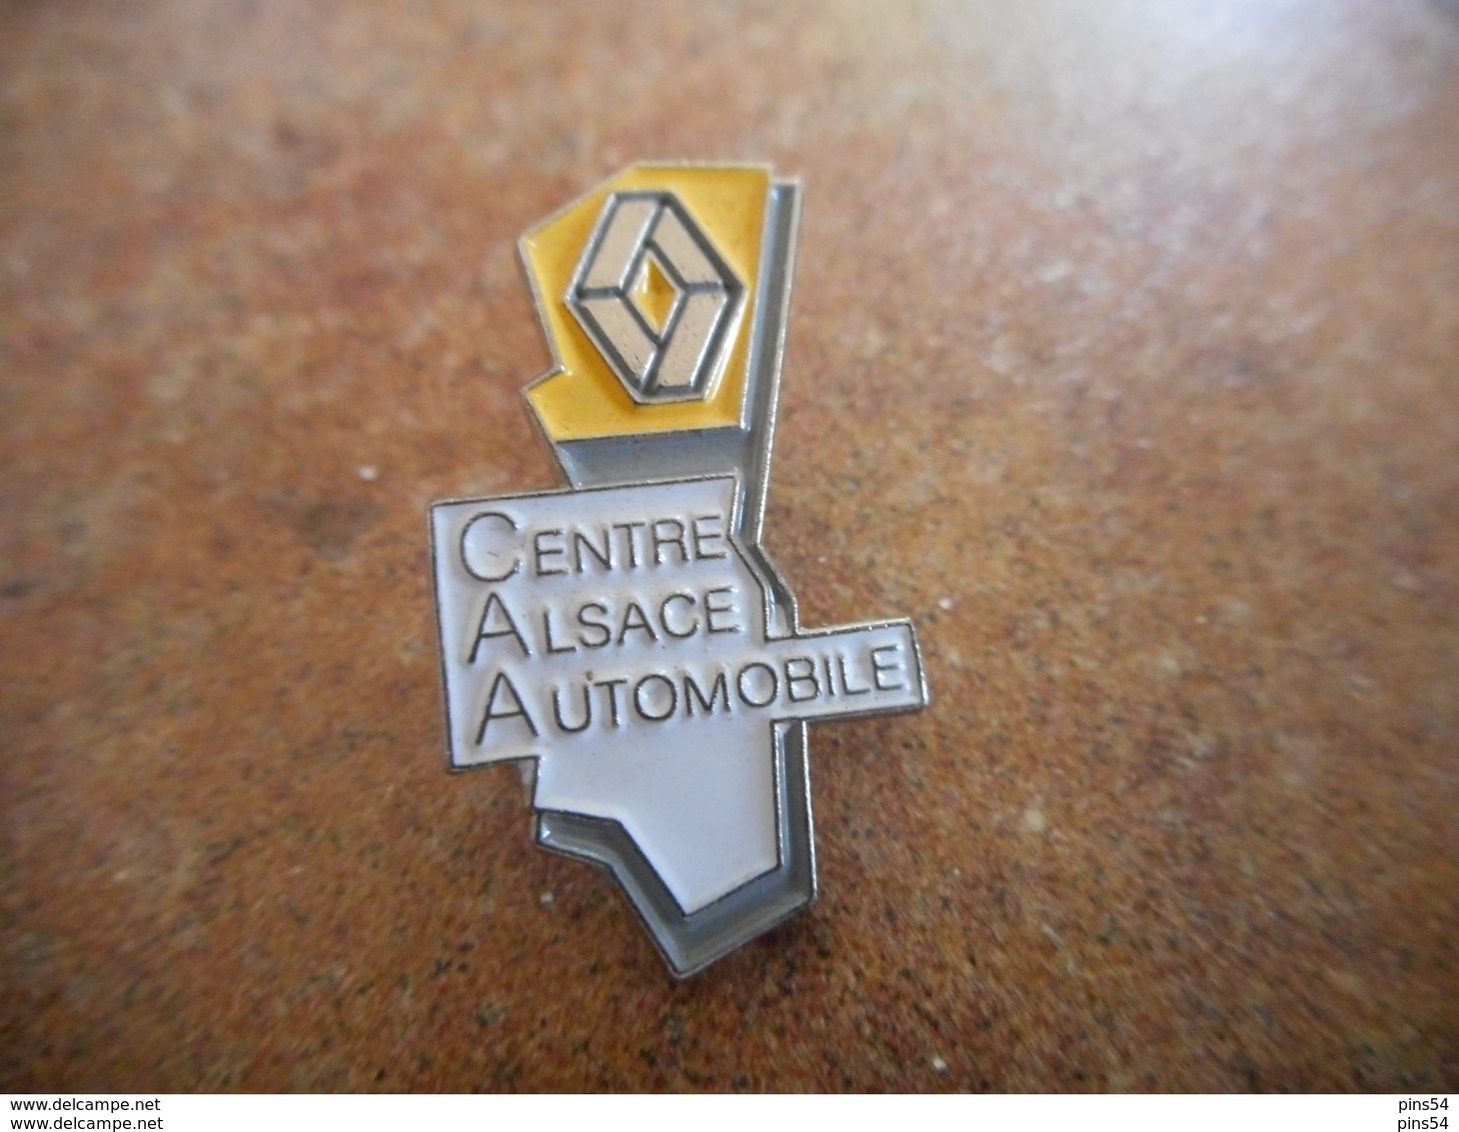 A010 -- Pin's Renault Alsace - Renault